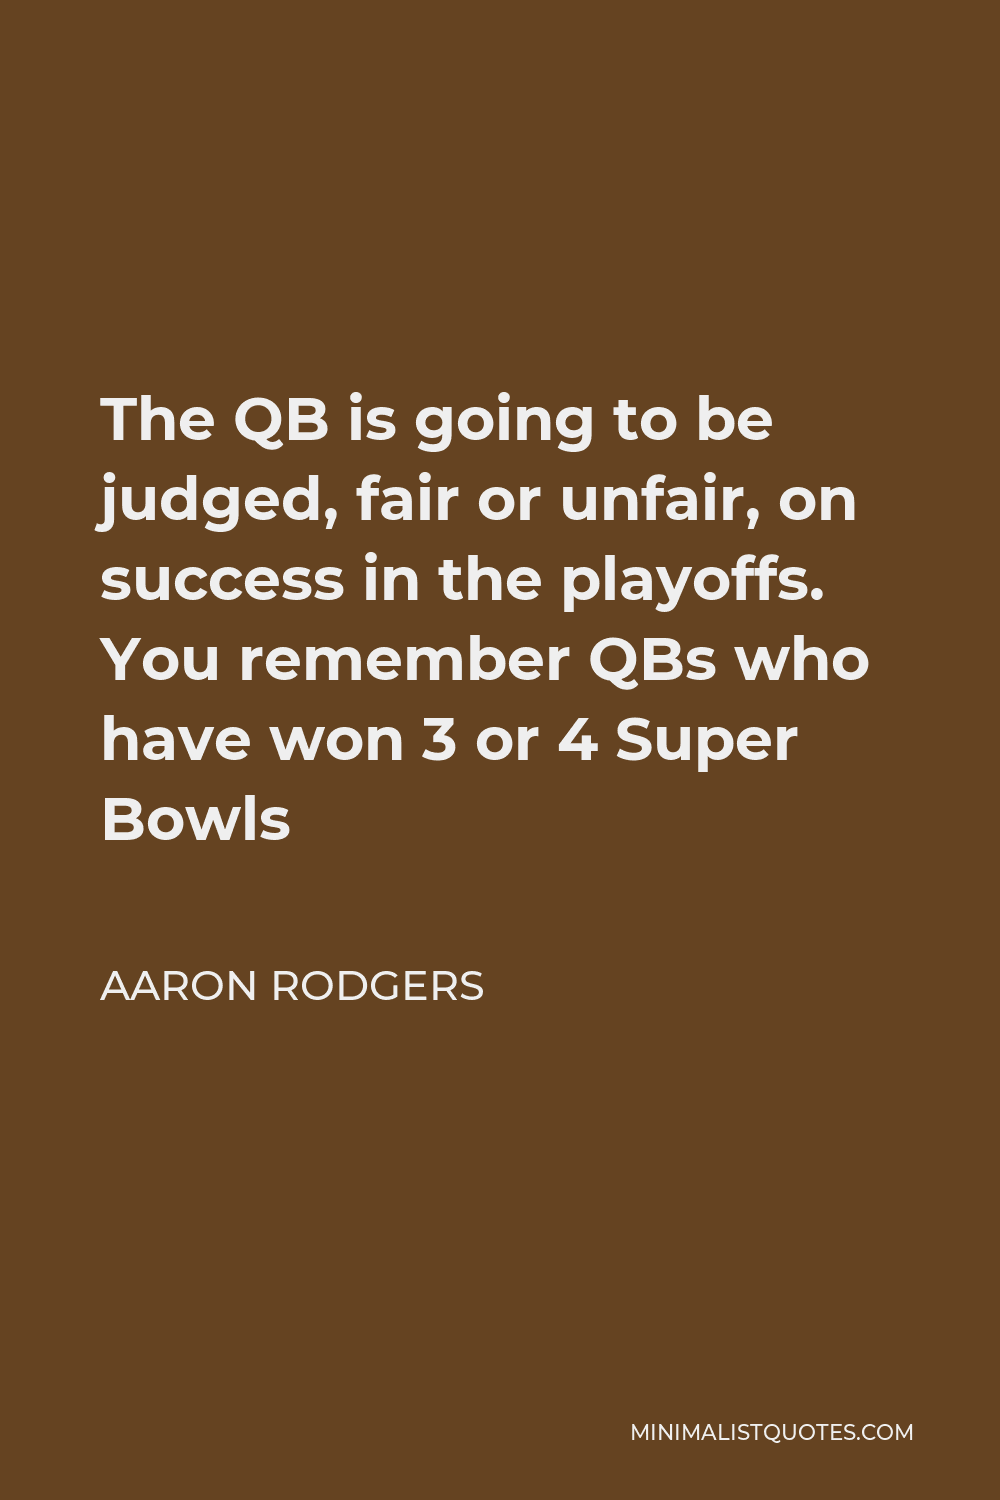 Aaron Rodgers Quote - The QB is going to be judged, fair or unfair, on success in the playoffs. You remember QBs who have won 3 or 4 Super Bowls